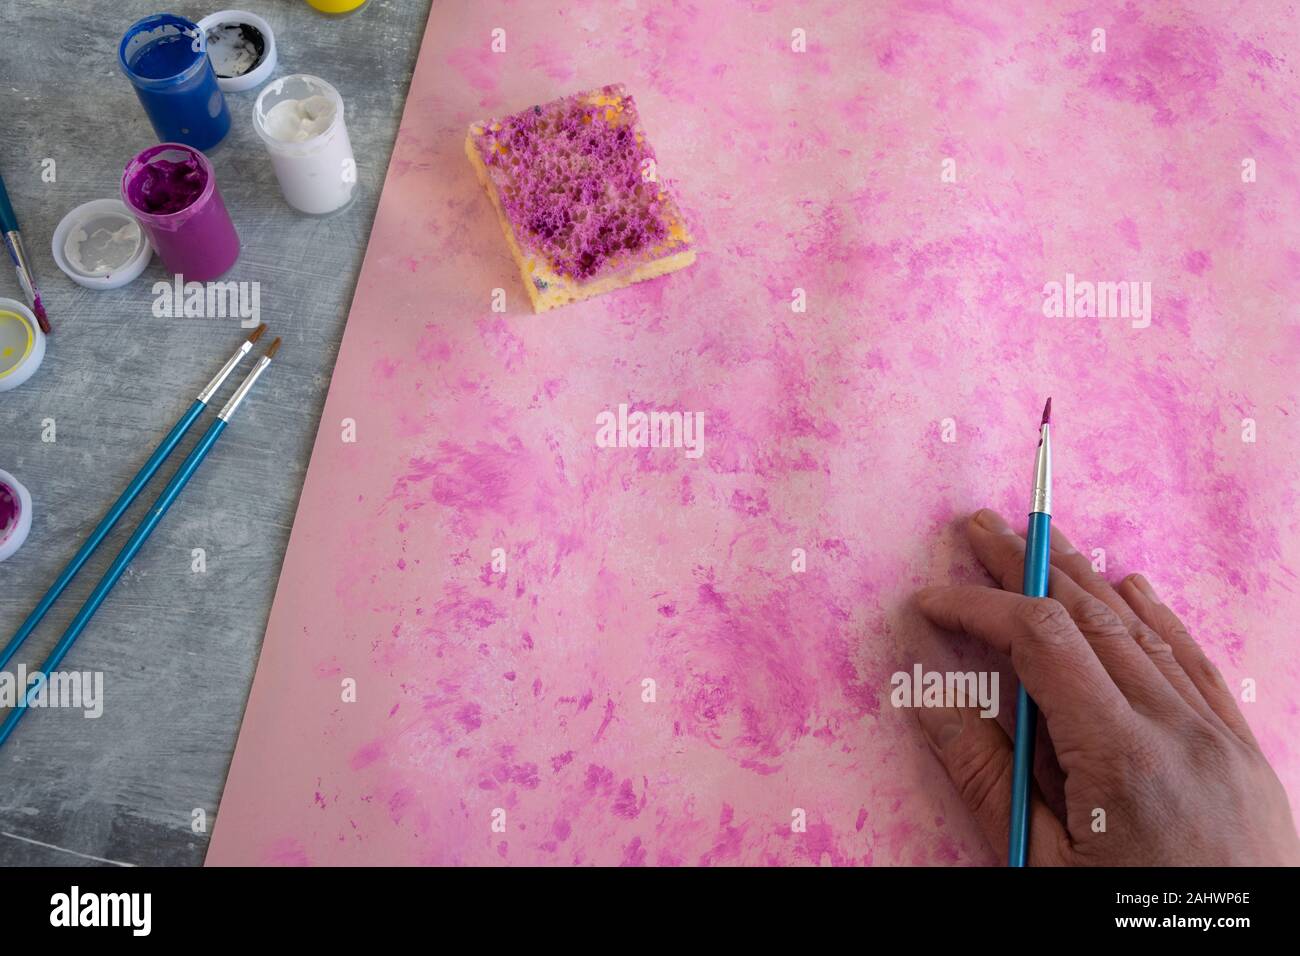 Top view of woman hand painting pink background, artistic creative occupation Stock Photo